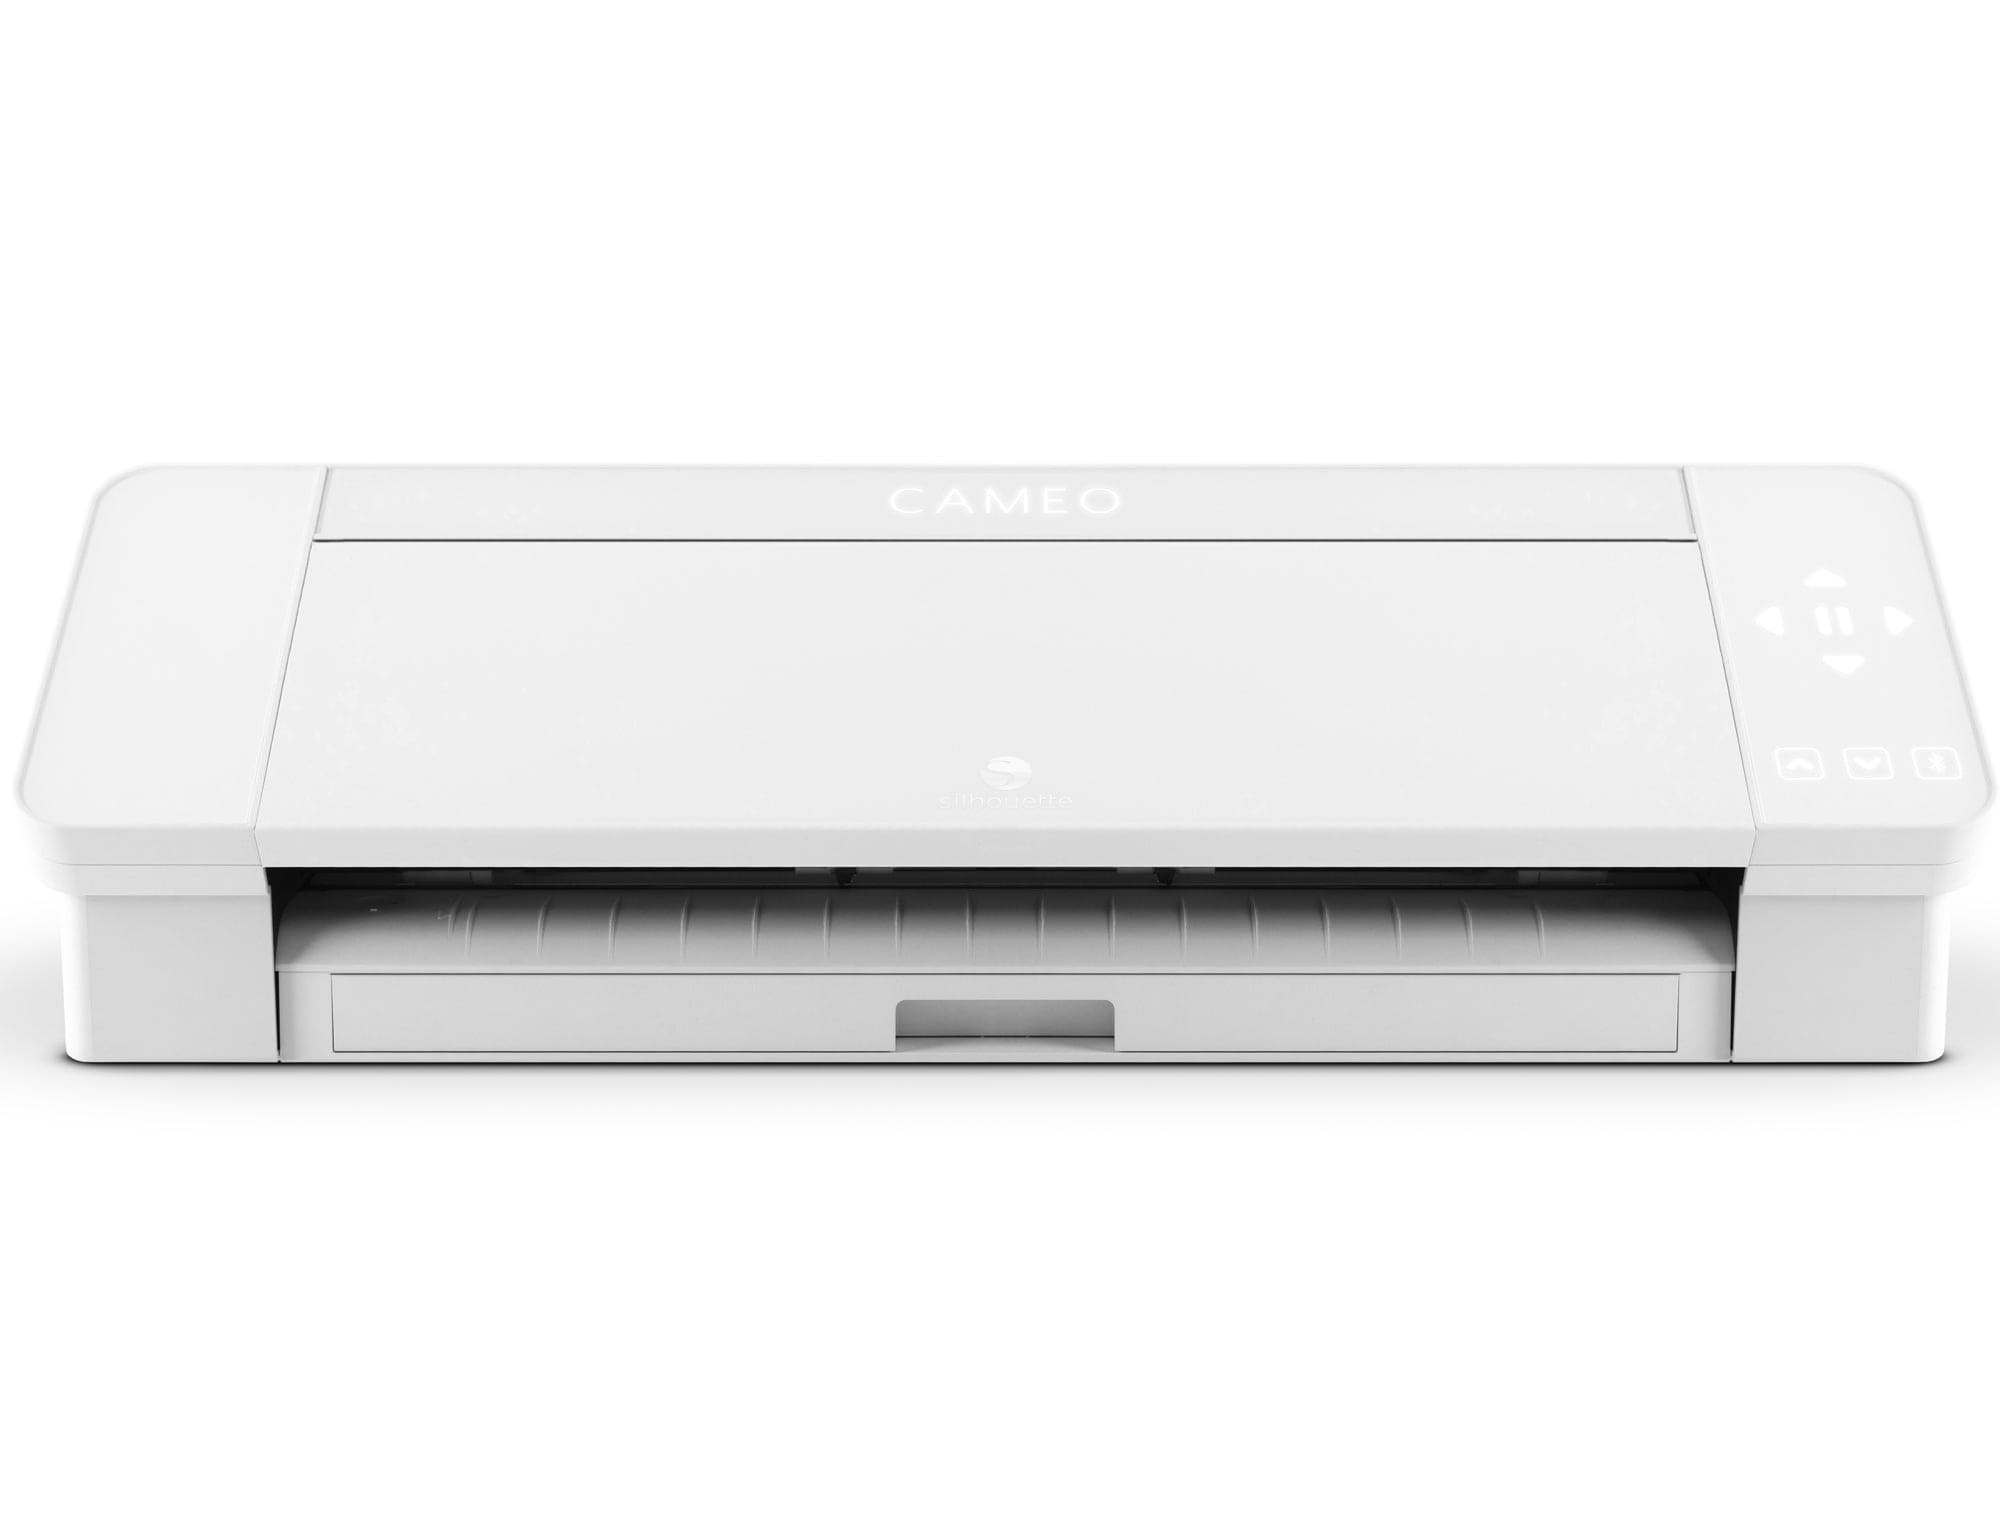 Silhouette White Cameo 4 Plus - 15 w/ 64 Oracal Vinyl Sheets, Tools, Guides